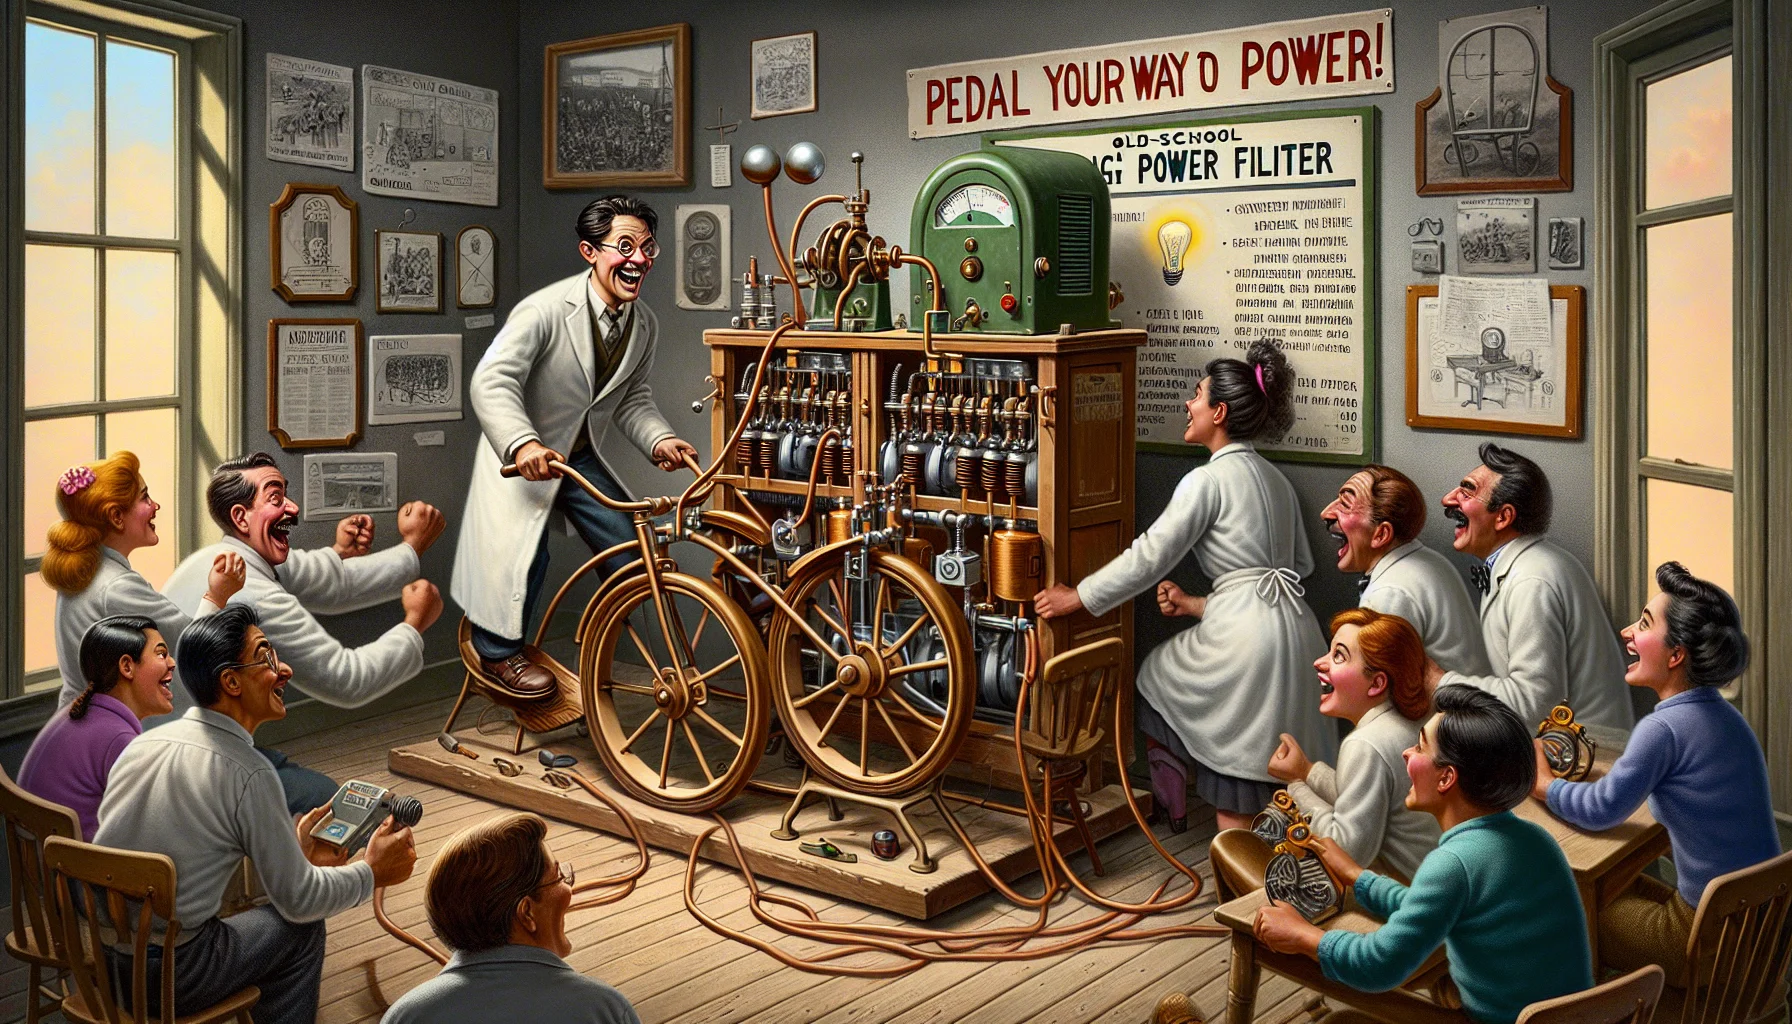 Imagine an amusing scenario, set within an old-school science fair. In the middle of the scene, prominently place a large 1800 Watt power filter, laboriously crafted with brass fittings and copper cabling. It seems to have two pedals attached like a bicycle. Next to this device is a lighthearted display board playfully titled, 'Pedal Your Way to Power!' On the side, a couple of lively Hispanic female scientist and an enthusiastic Middle-Eastern male physicist, are encouraging a diverse crowd of people to try pedaling the device to generate electricity. The moment is filled with laughter, light bulbs flickering, and a sense of community learning.